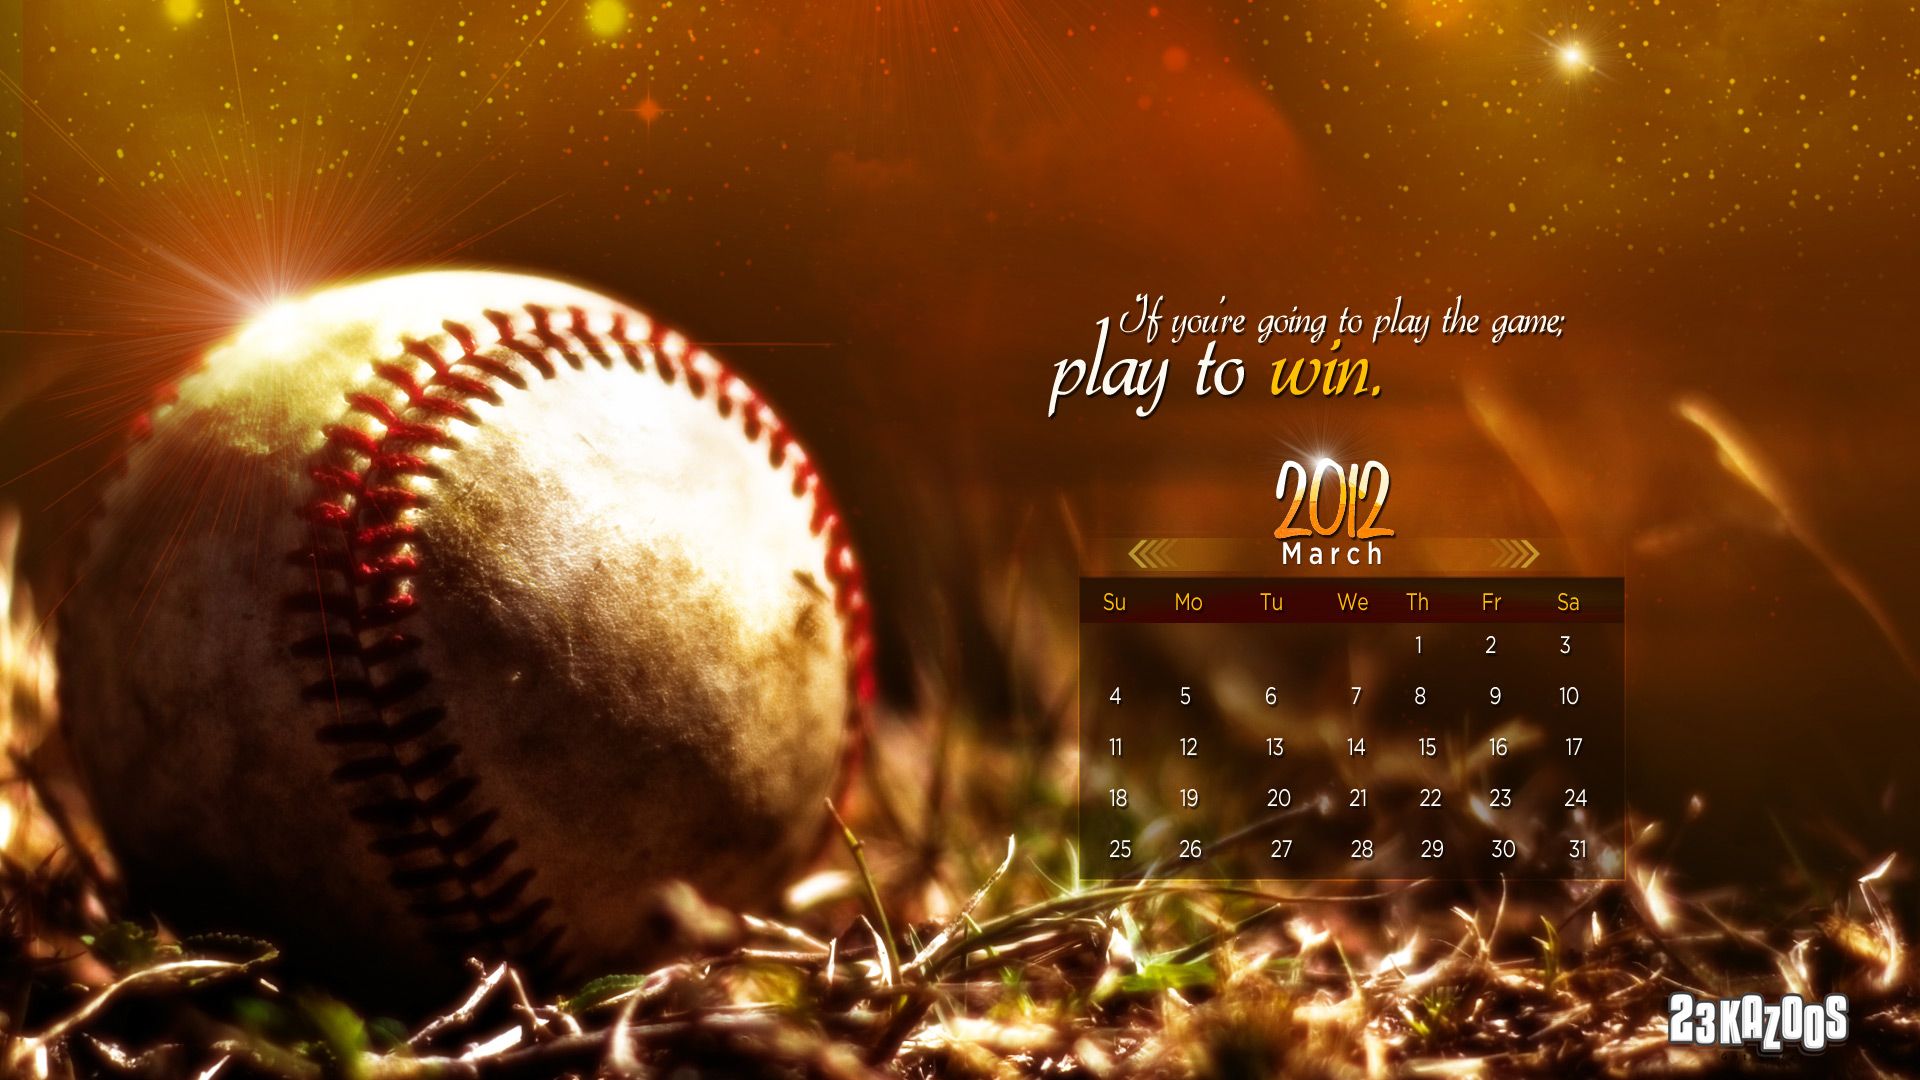 49 Cool Baseball Backgrounds Stock Photos HighRes Pictures and Images   Getty Images